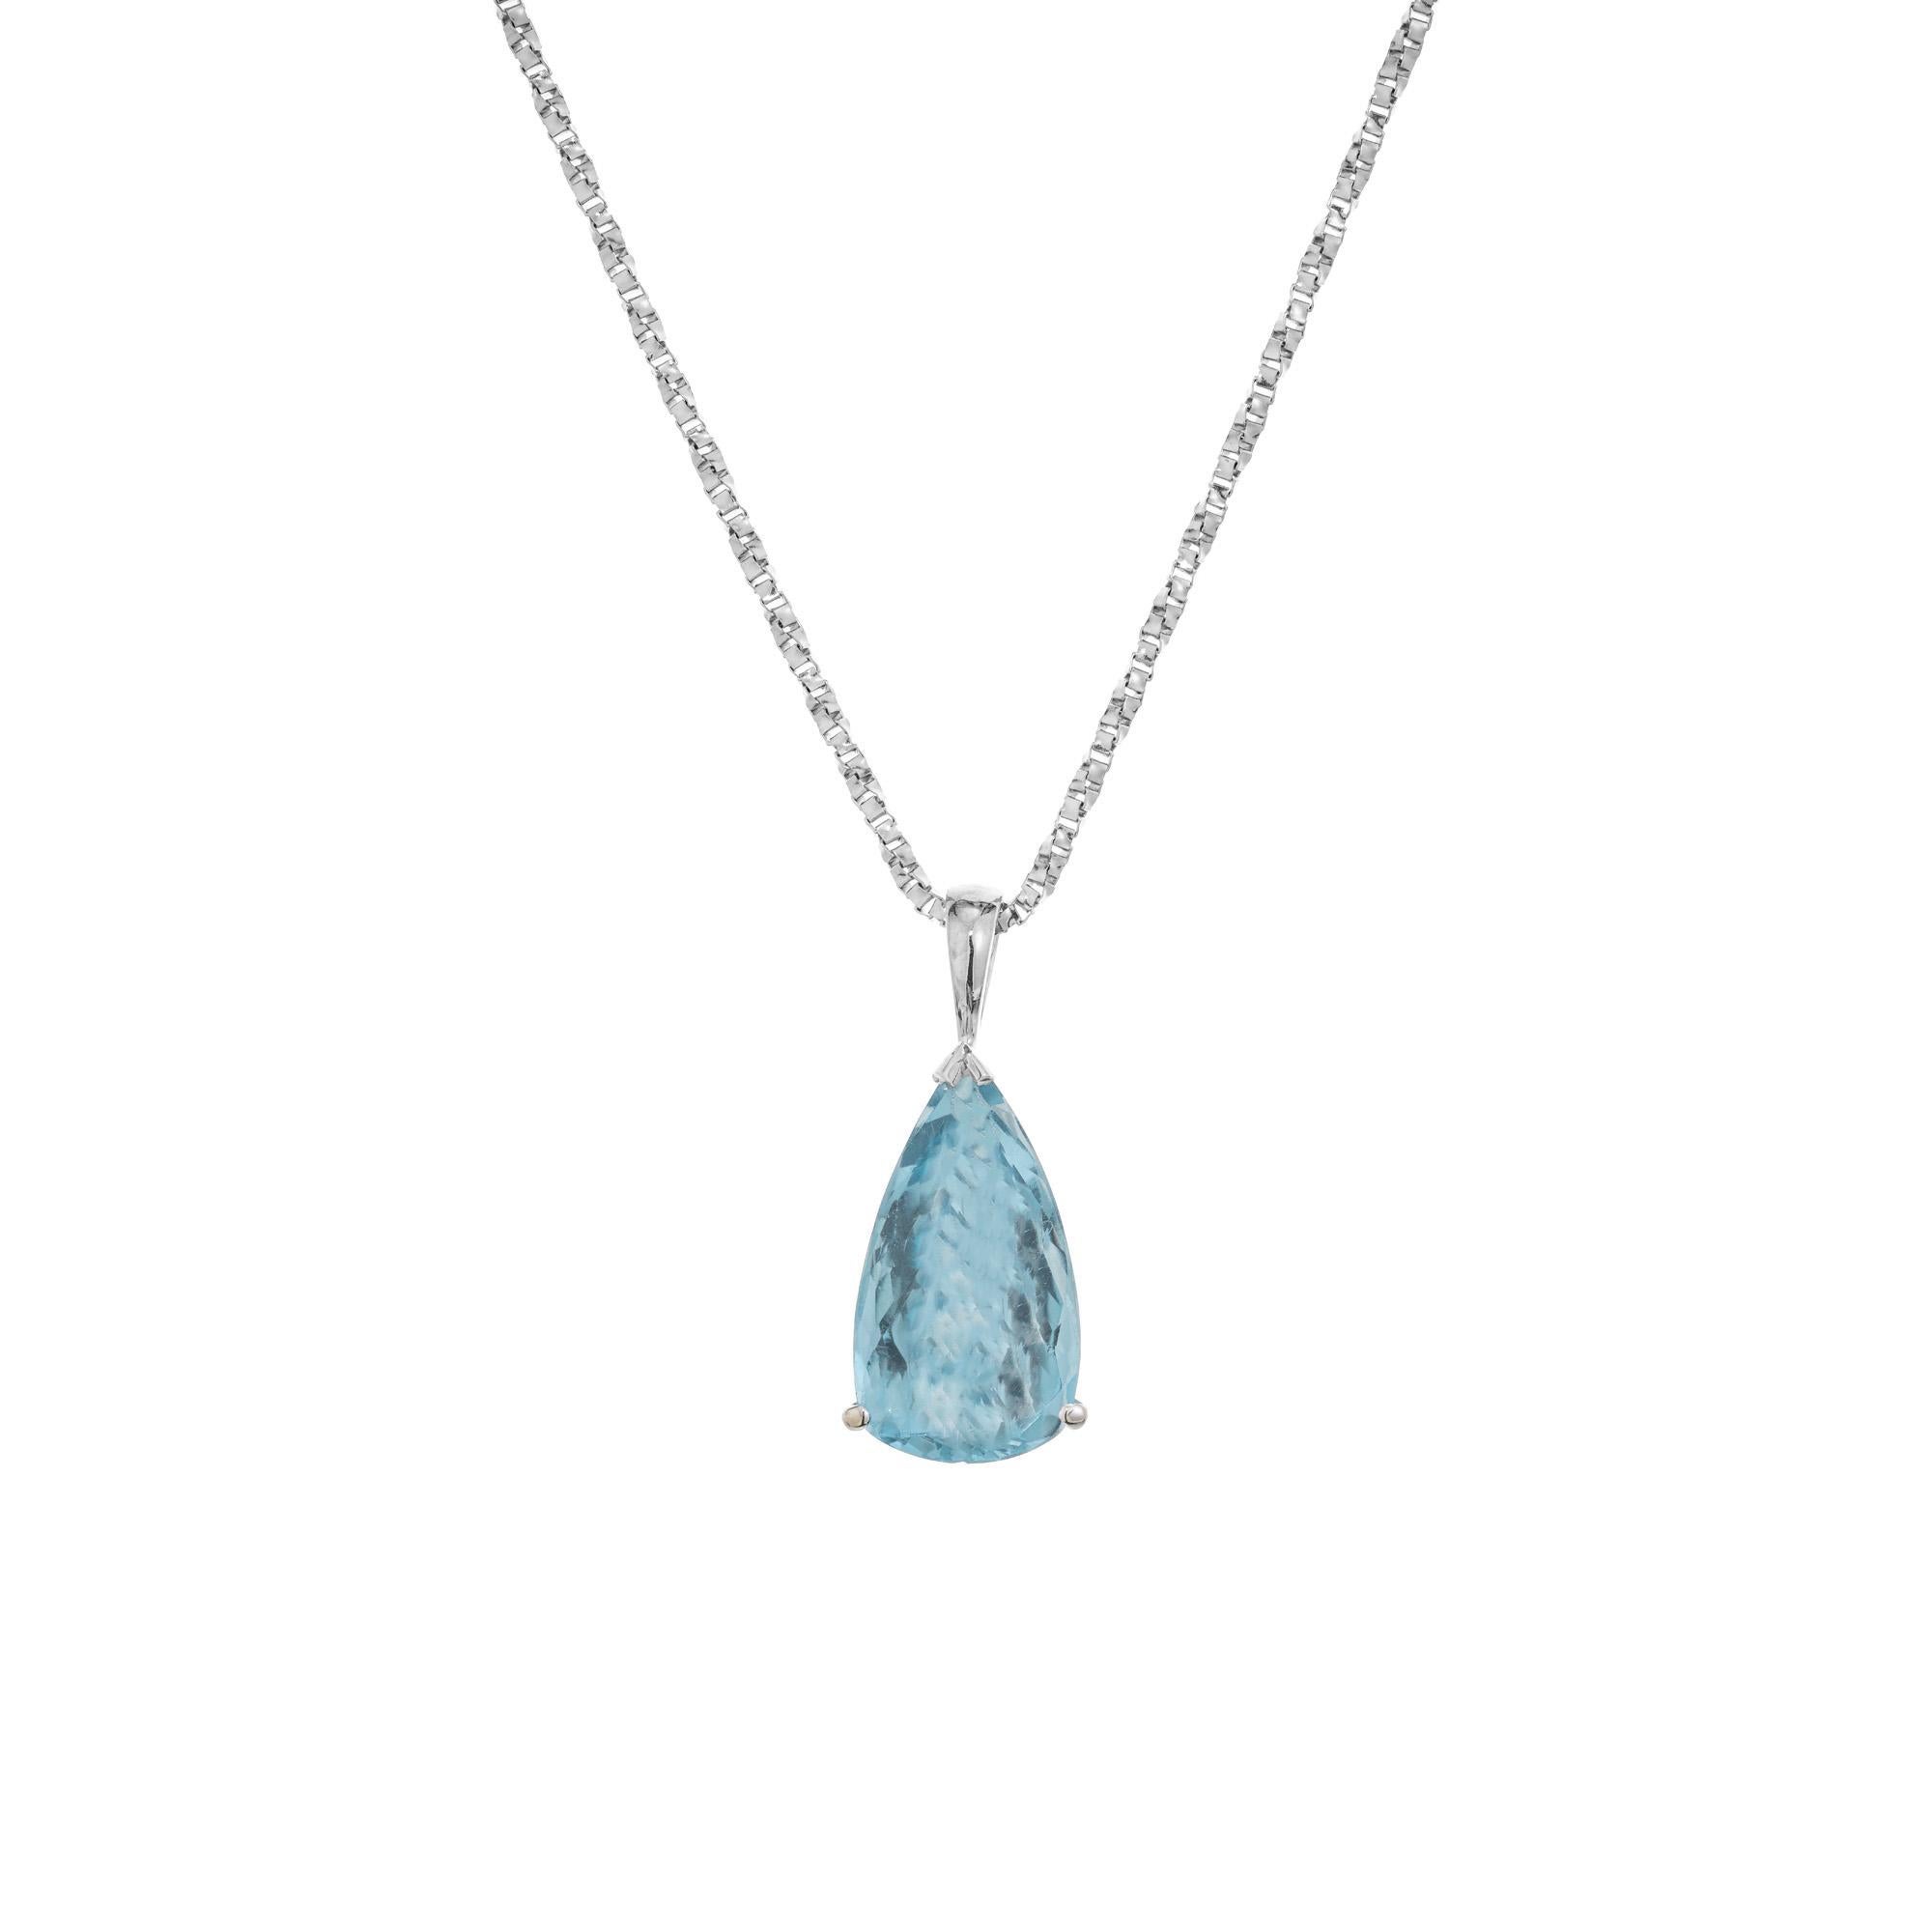 Aquamarine pendant necklace. 3.00ct pear shaped aqua set in a simple classic pendant which dangles from a twisted box 18 Inch chain.  Designed and crafted in the Peter Suchy Workshop.

1 pear shape blue aqua, VS approx. 3.00cts
14k white gold